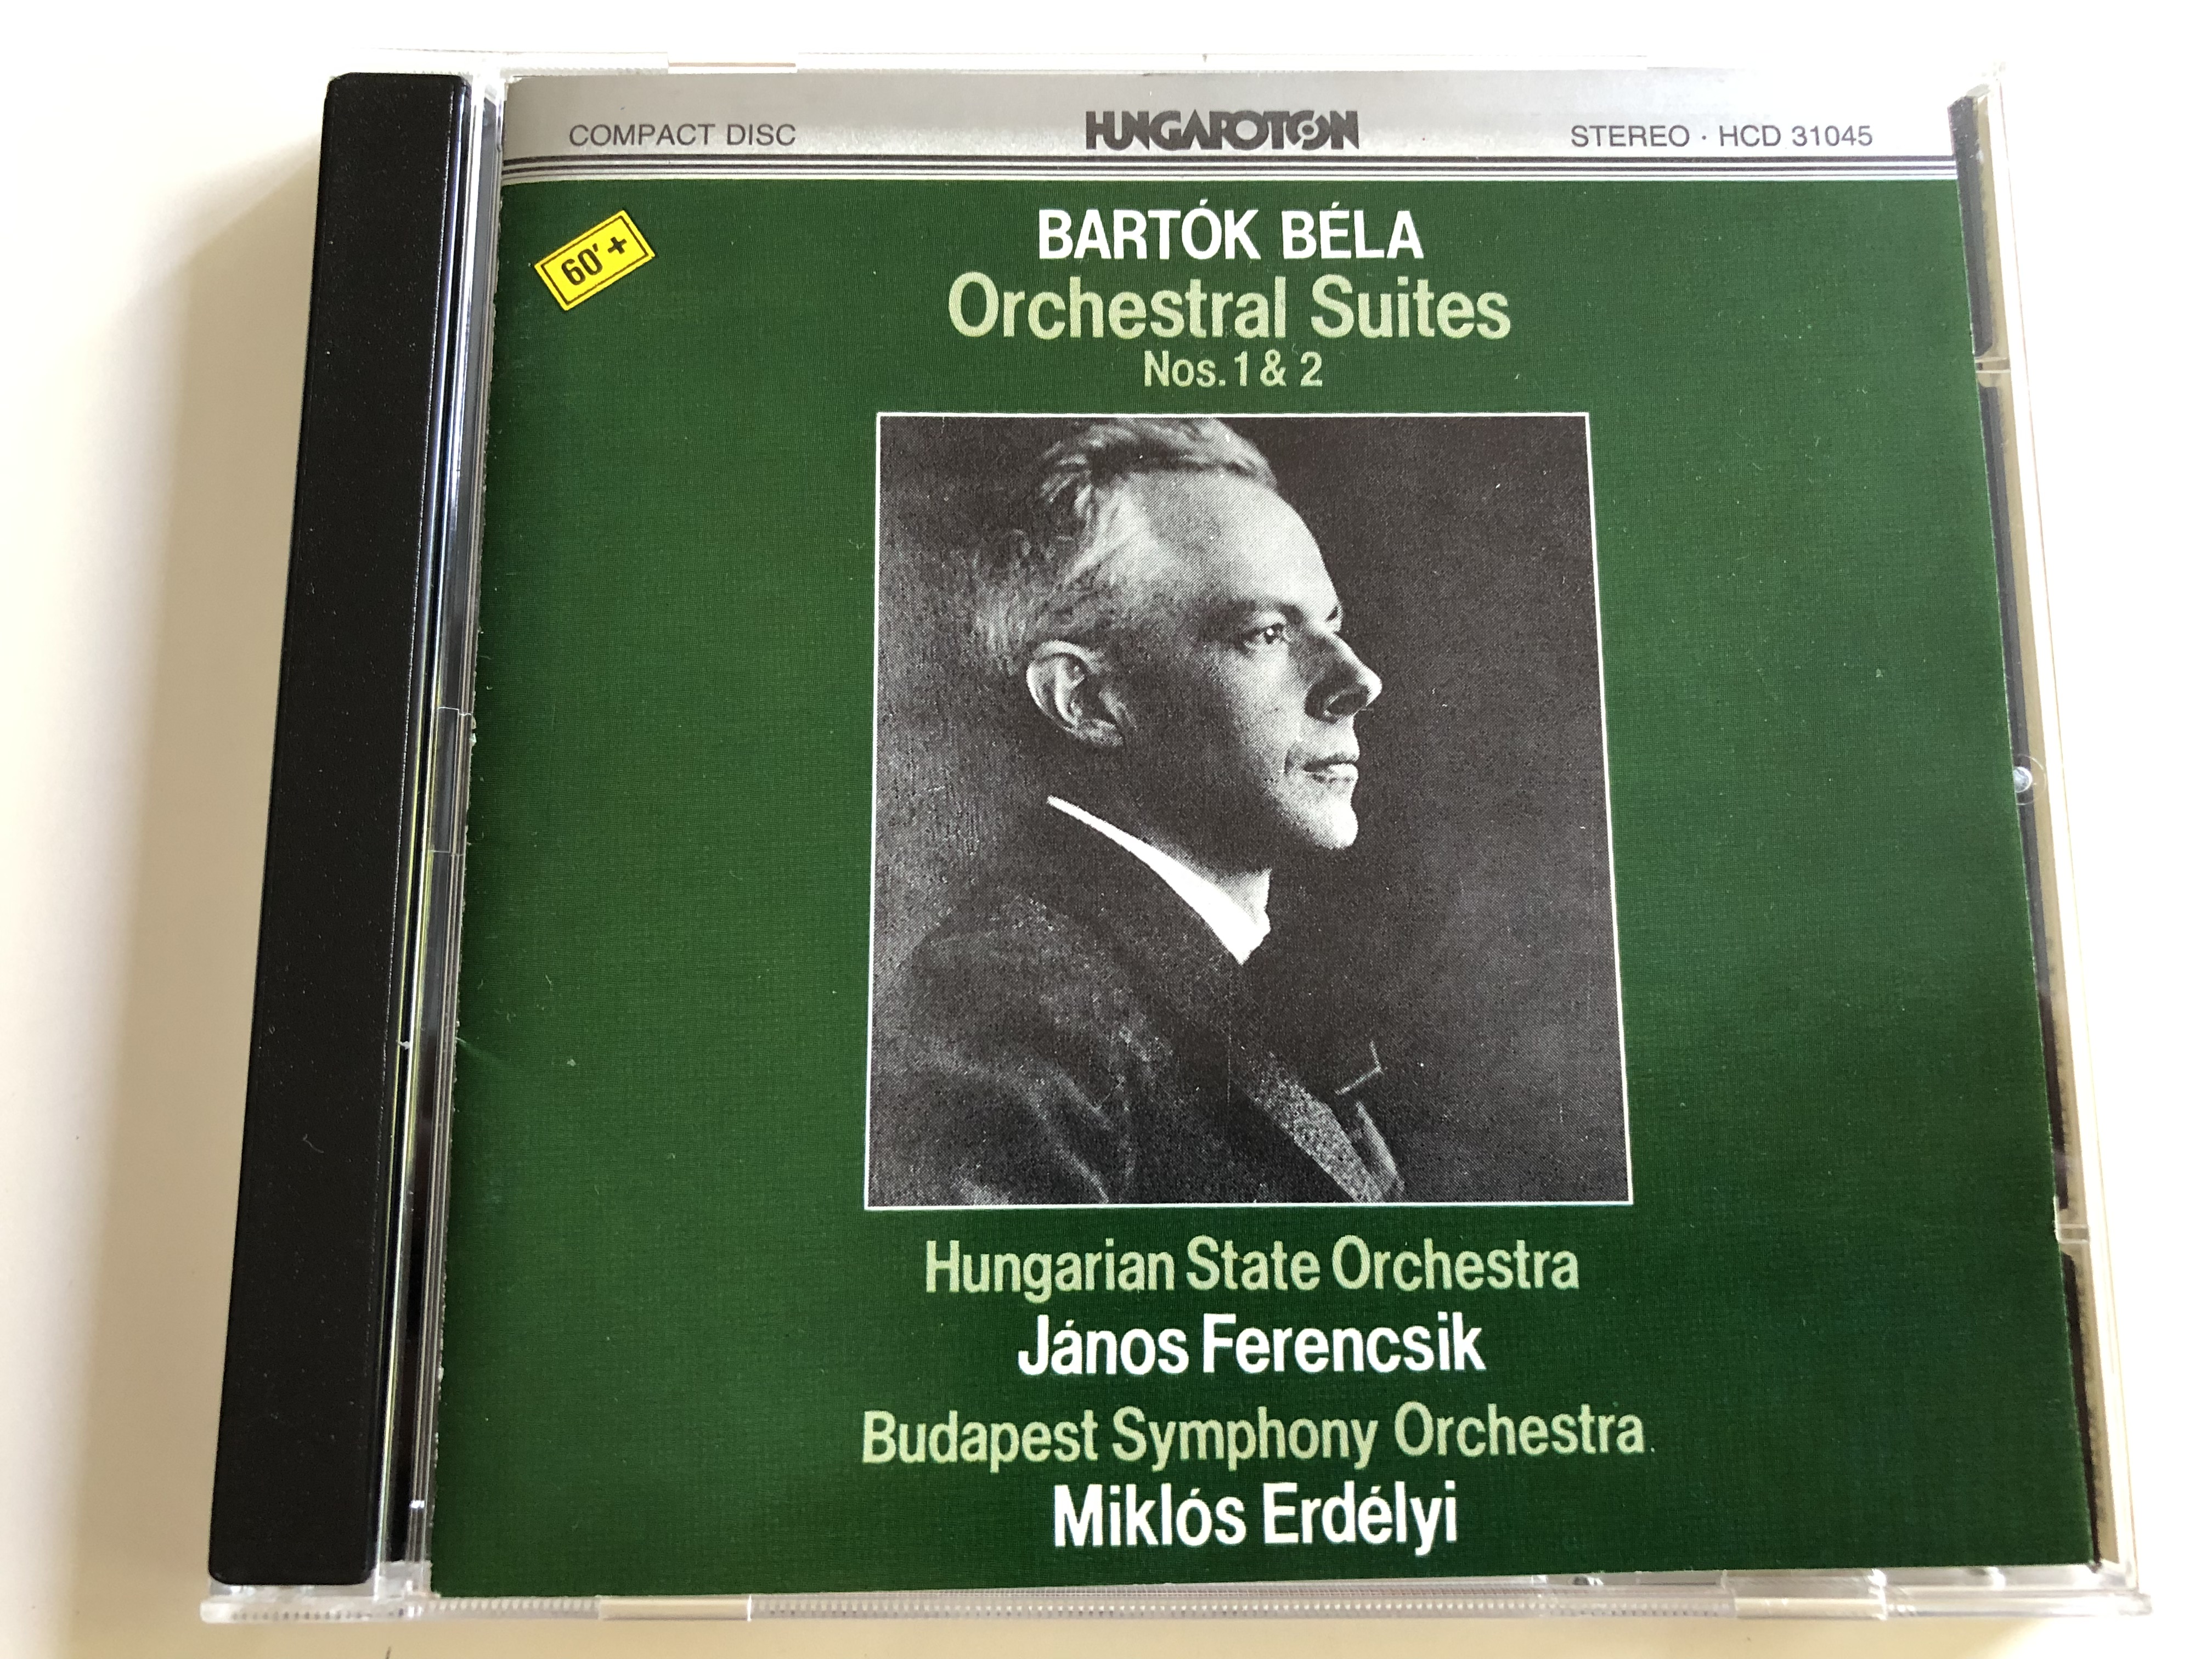 bart-k-b-la-orchestral-suites-nos.-1-2-hungarian-state-orchestra-conducted-by-j-nos-ferencsik-budapest-symphony-orchestra-conducted-by-mikl-s-erd-lyi-hcd-31045-audio-cd-1988-1-.jpg